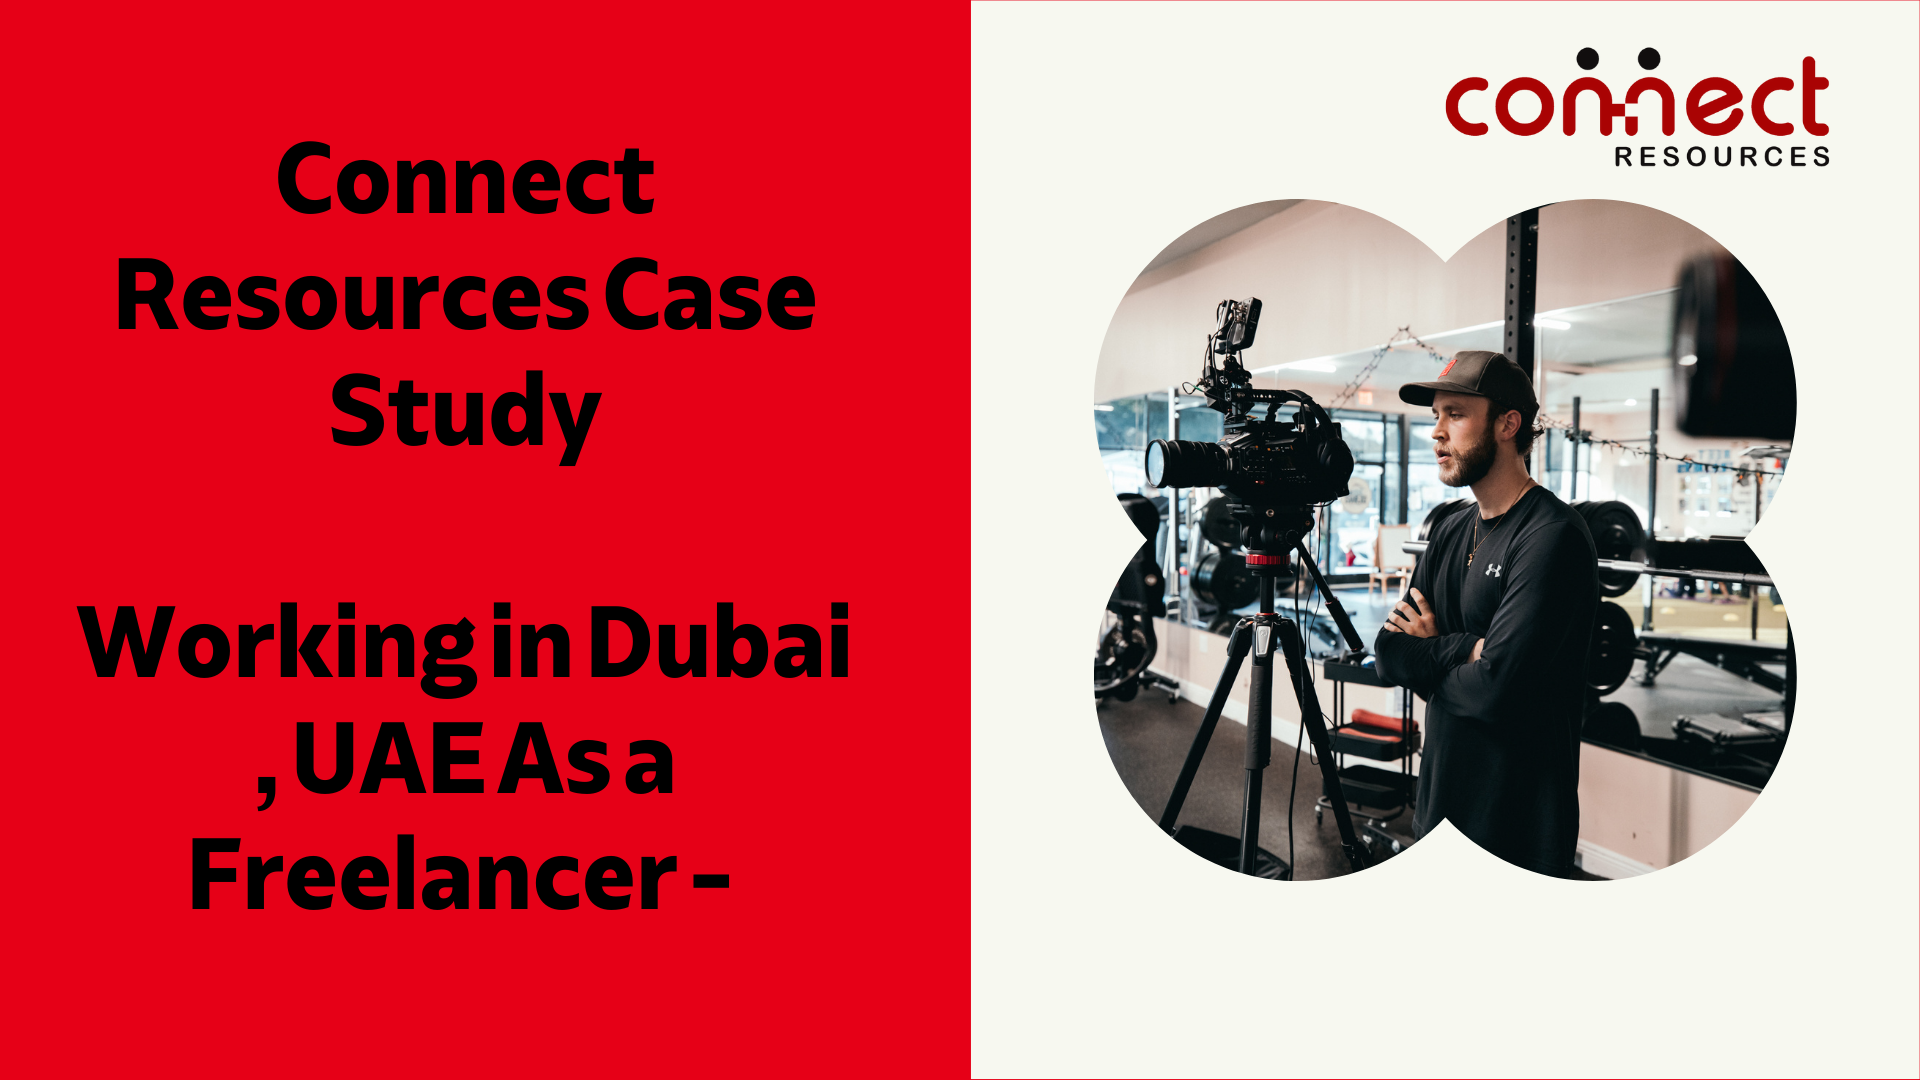 Working in Dubai , UAE As a Freelancer – Connect Resources Case Study